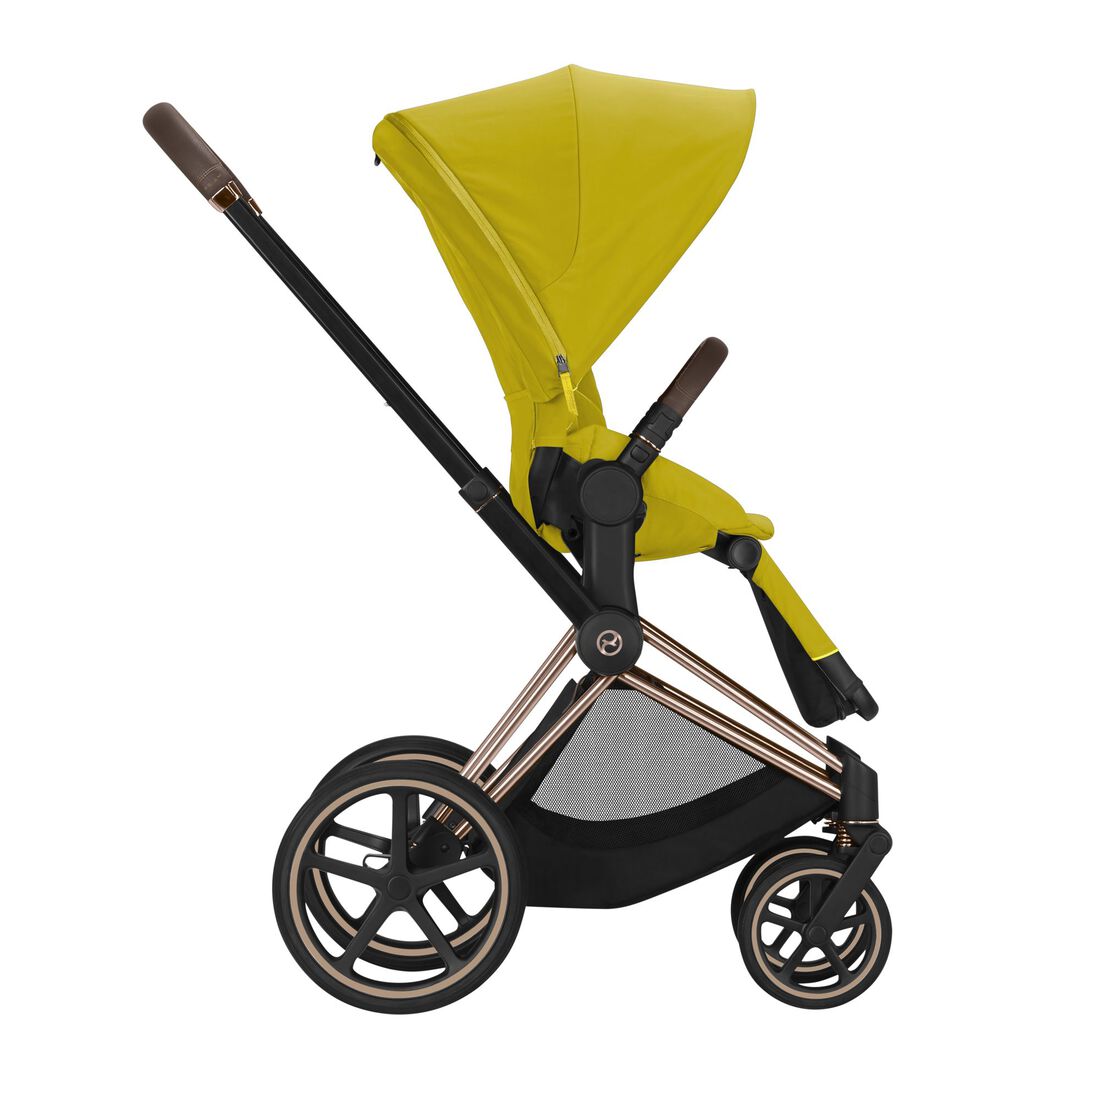 CYBEX Priam 3 Seat Pack - Mustard Yellow in Mustard Yellow large image number 3